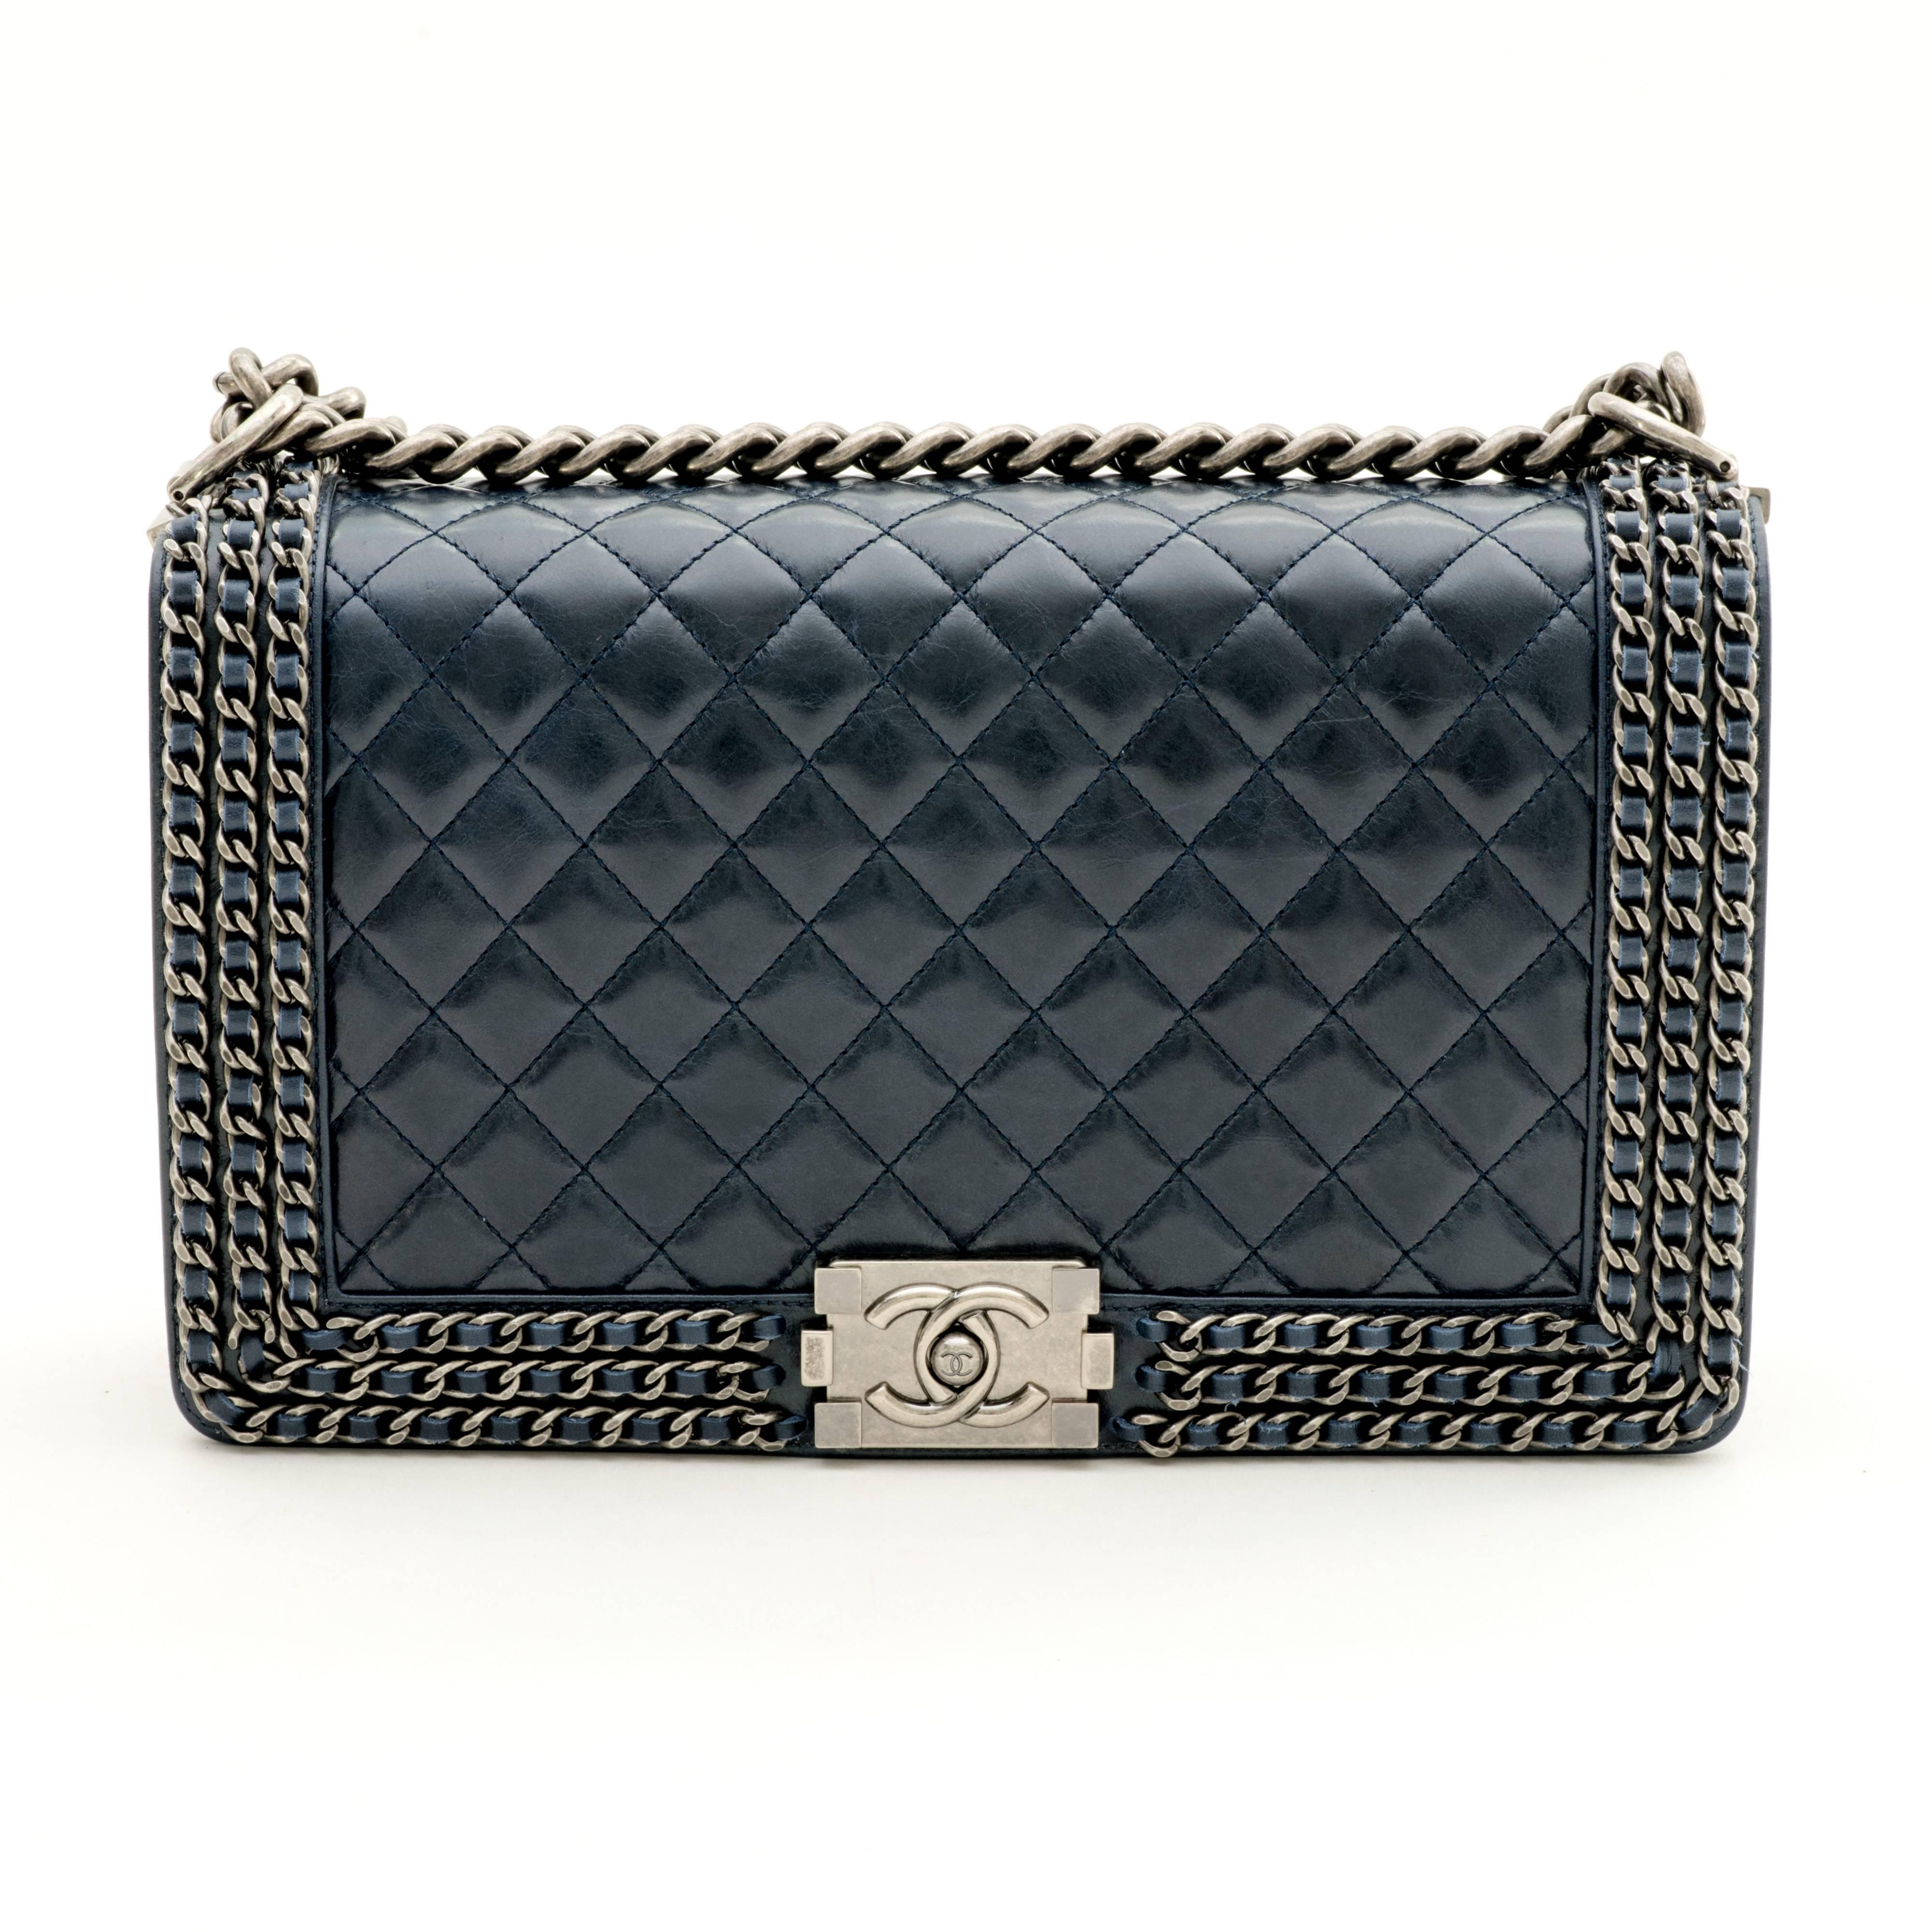 Chanel New Medium Chained Boy bag made of blue quilted leather with antique silver tone hardware.
 
This bag features a full front flap with the signature Le Boy CC push lock closure and a chain link, and leather shoulder/crossbody strap. 
 
The